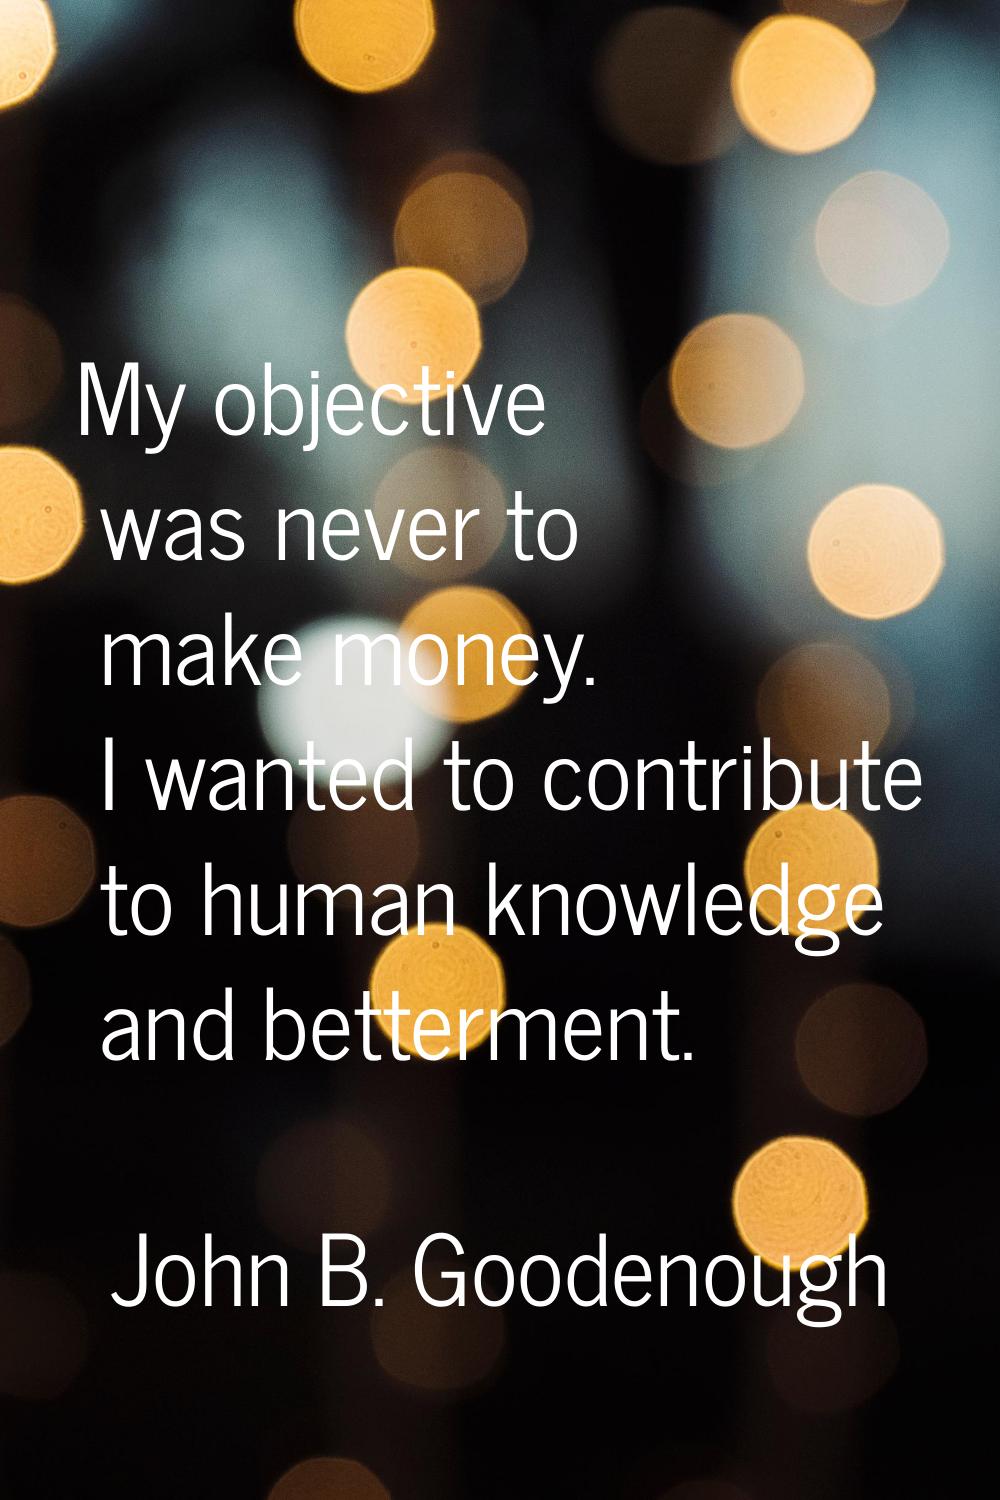 My objective was never to make money. I wanted to contribute to human knowledge and betterment.